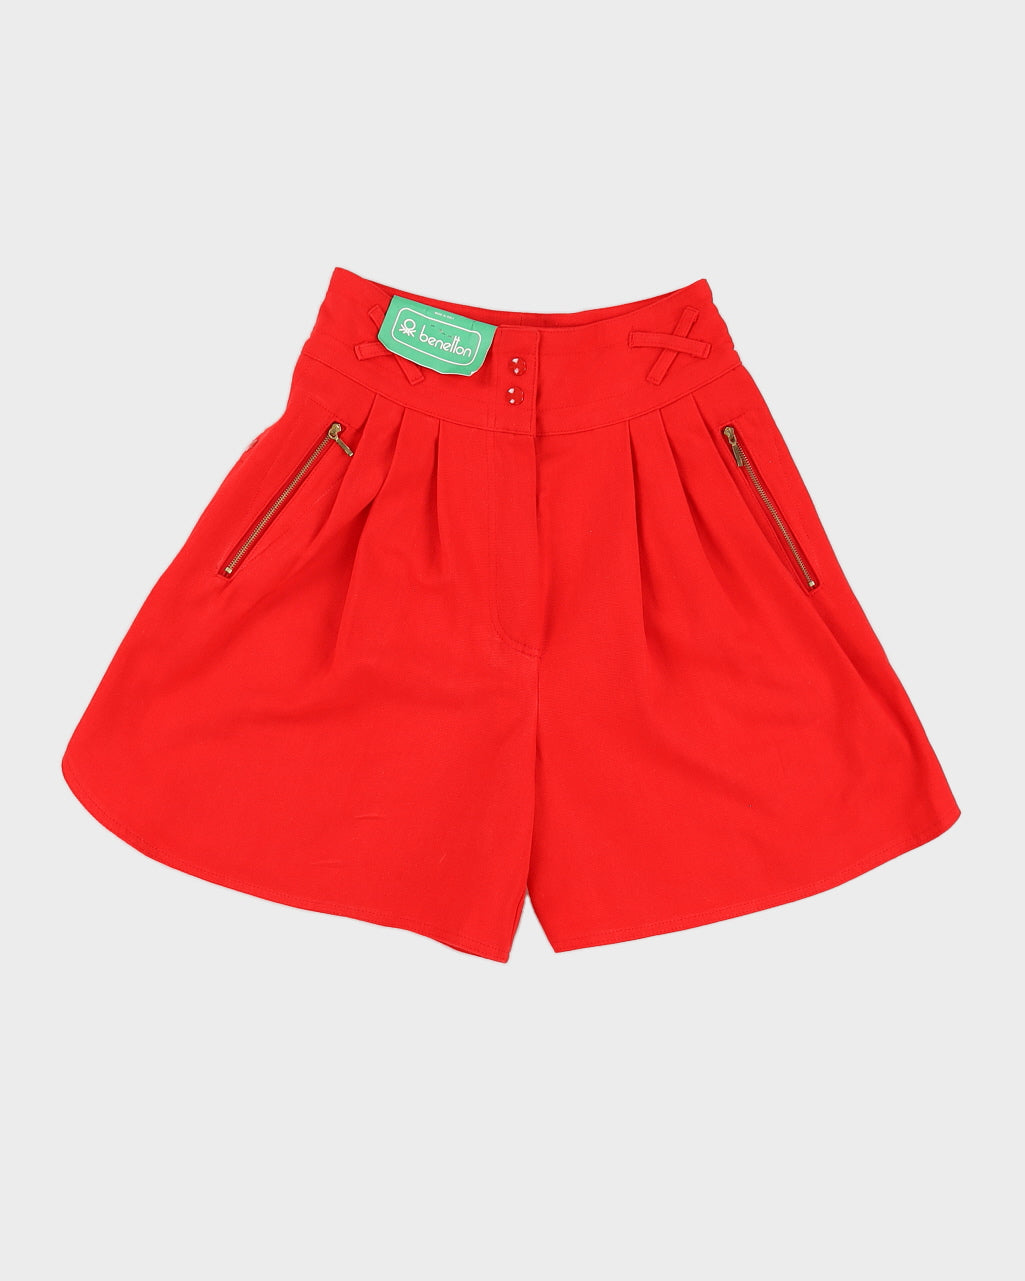 Vintage 70s Benetton High Waisted Red Shorts - W28